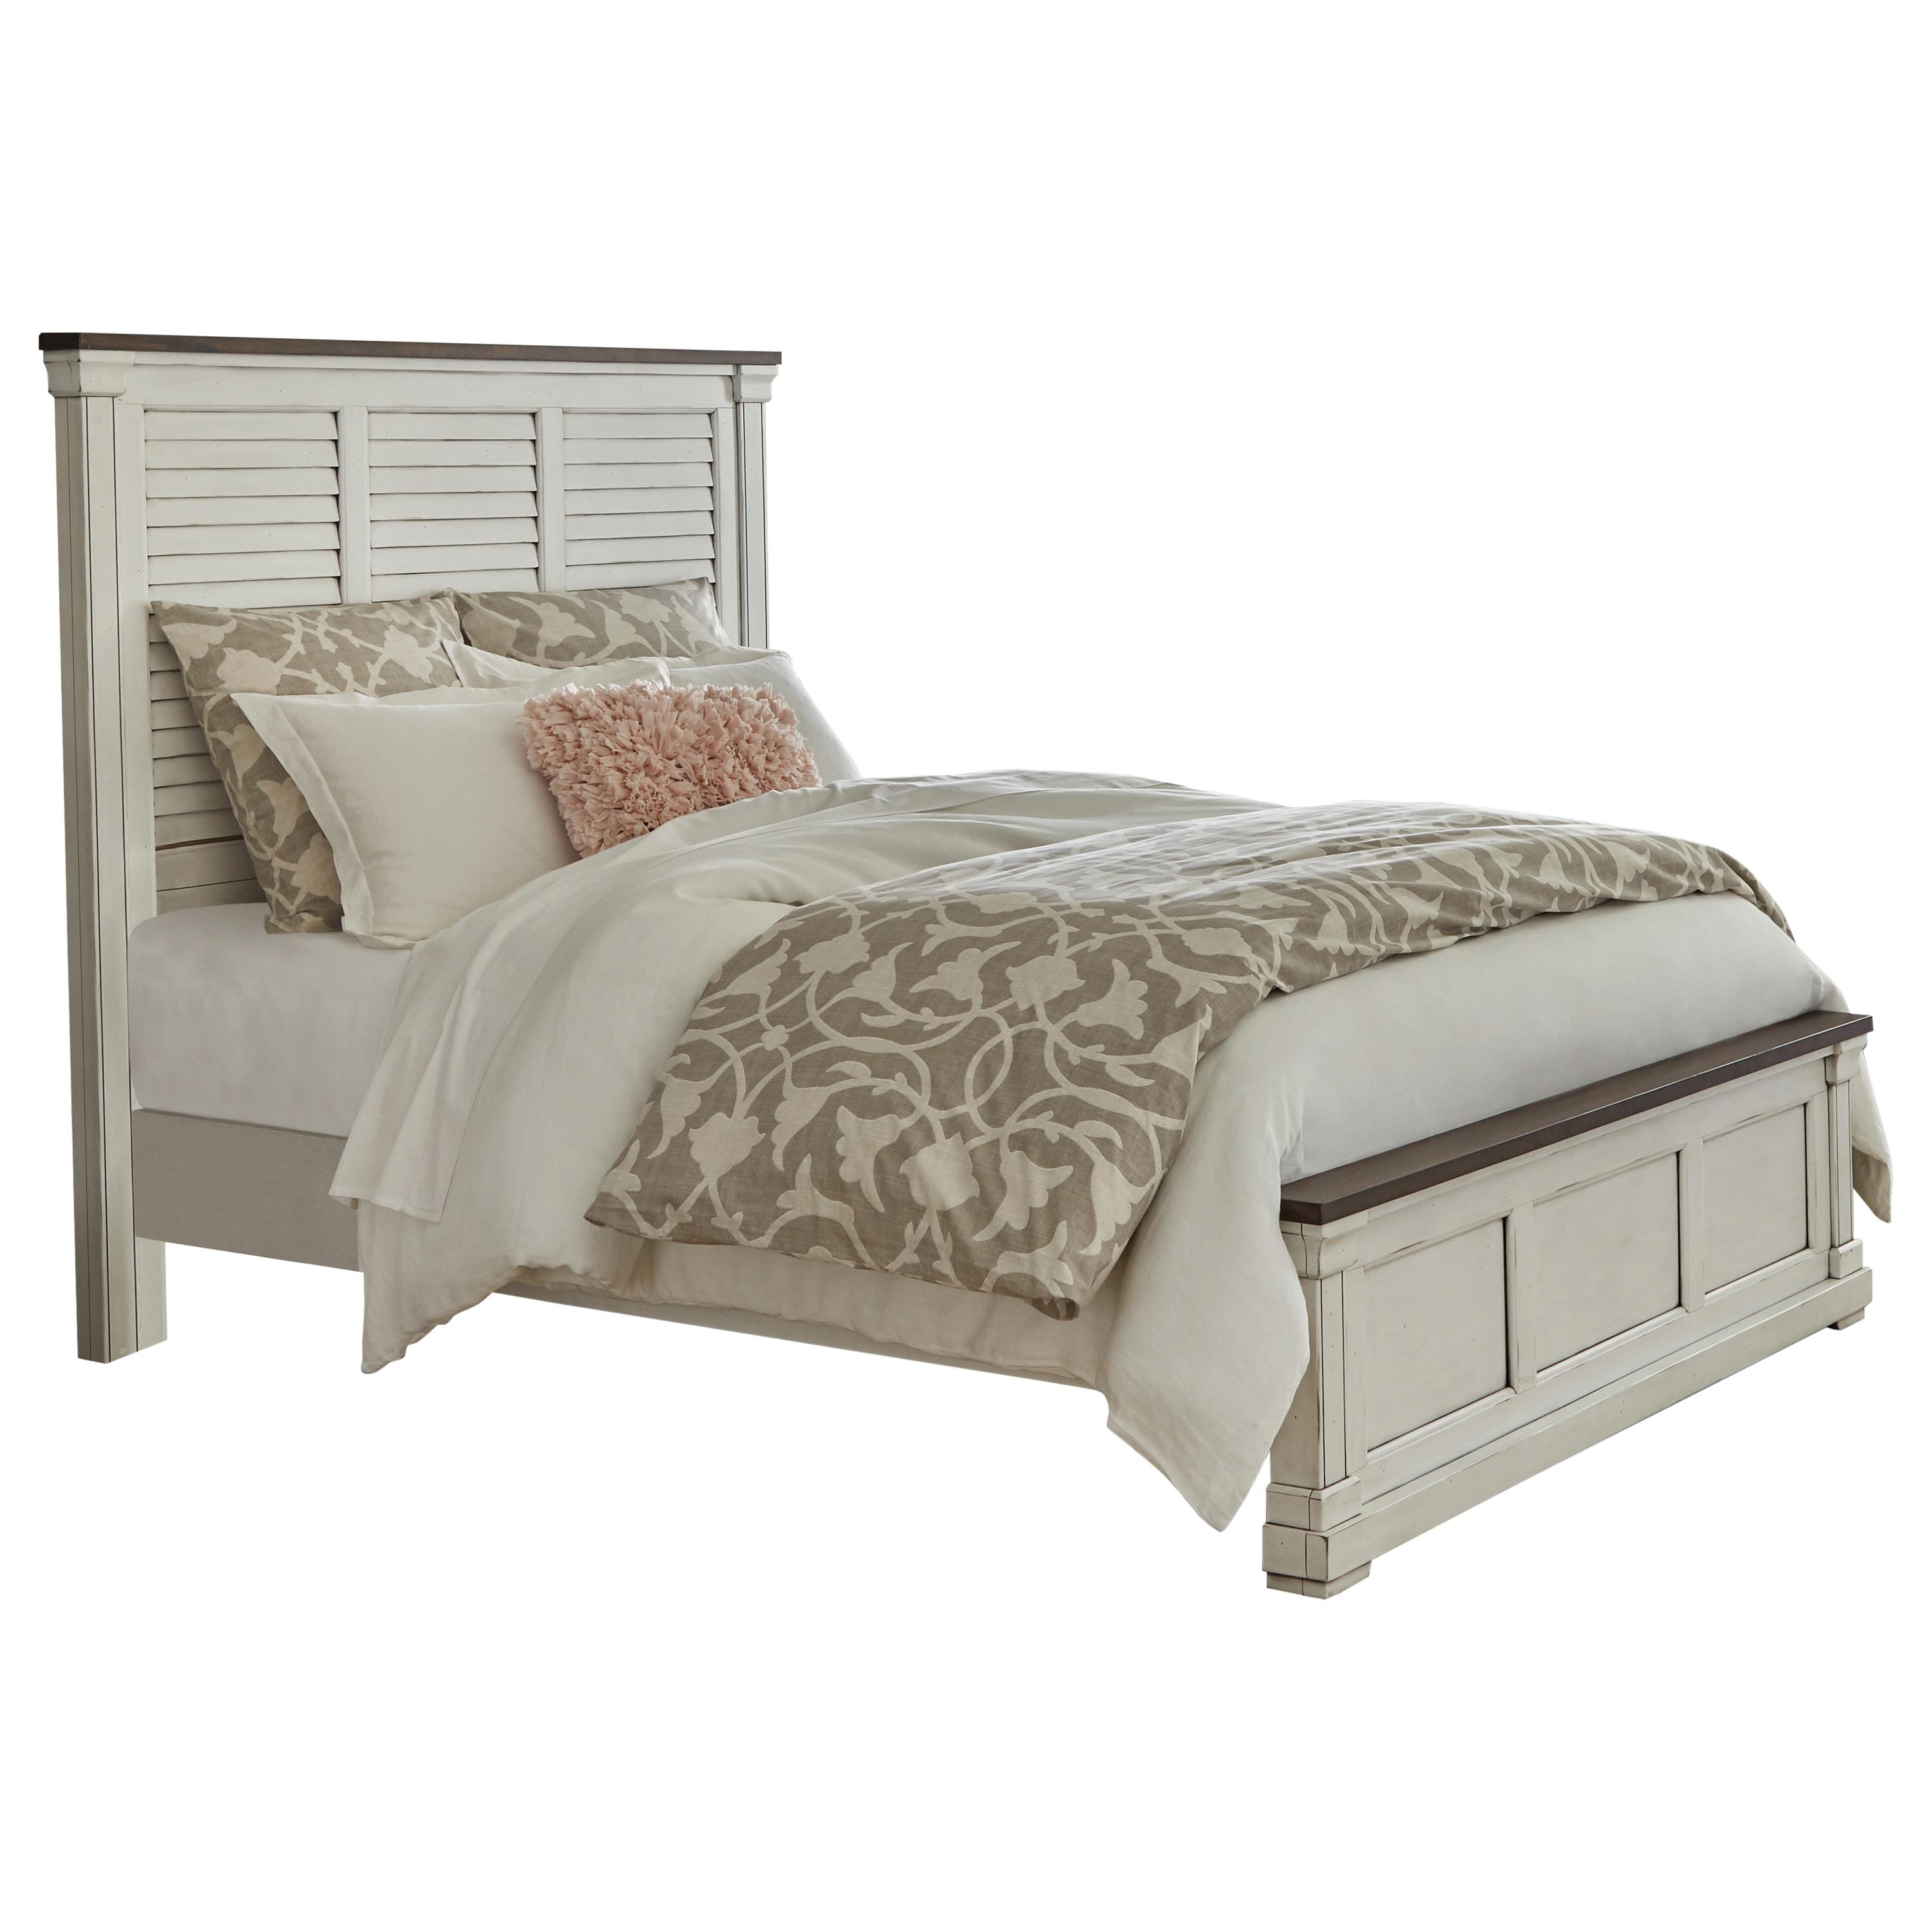 Farmhouse Bed 223351KW Hillcrest 223351KW in White 